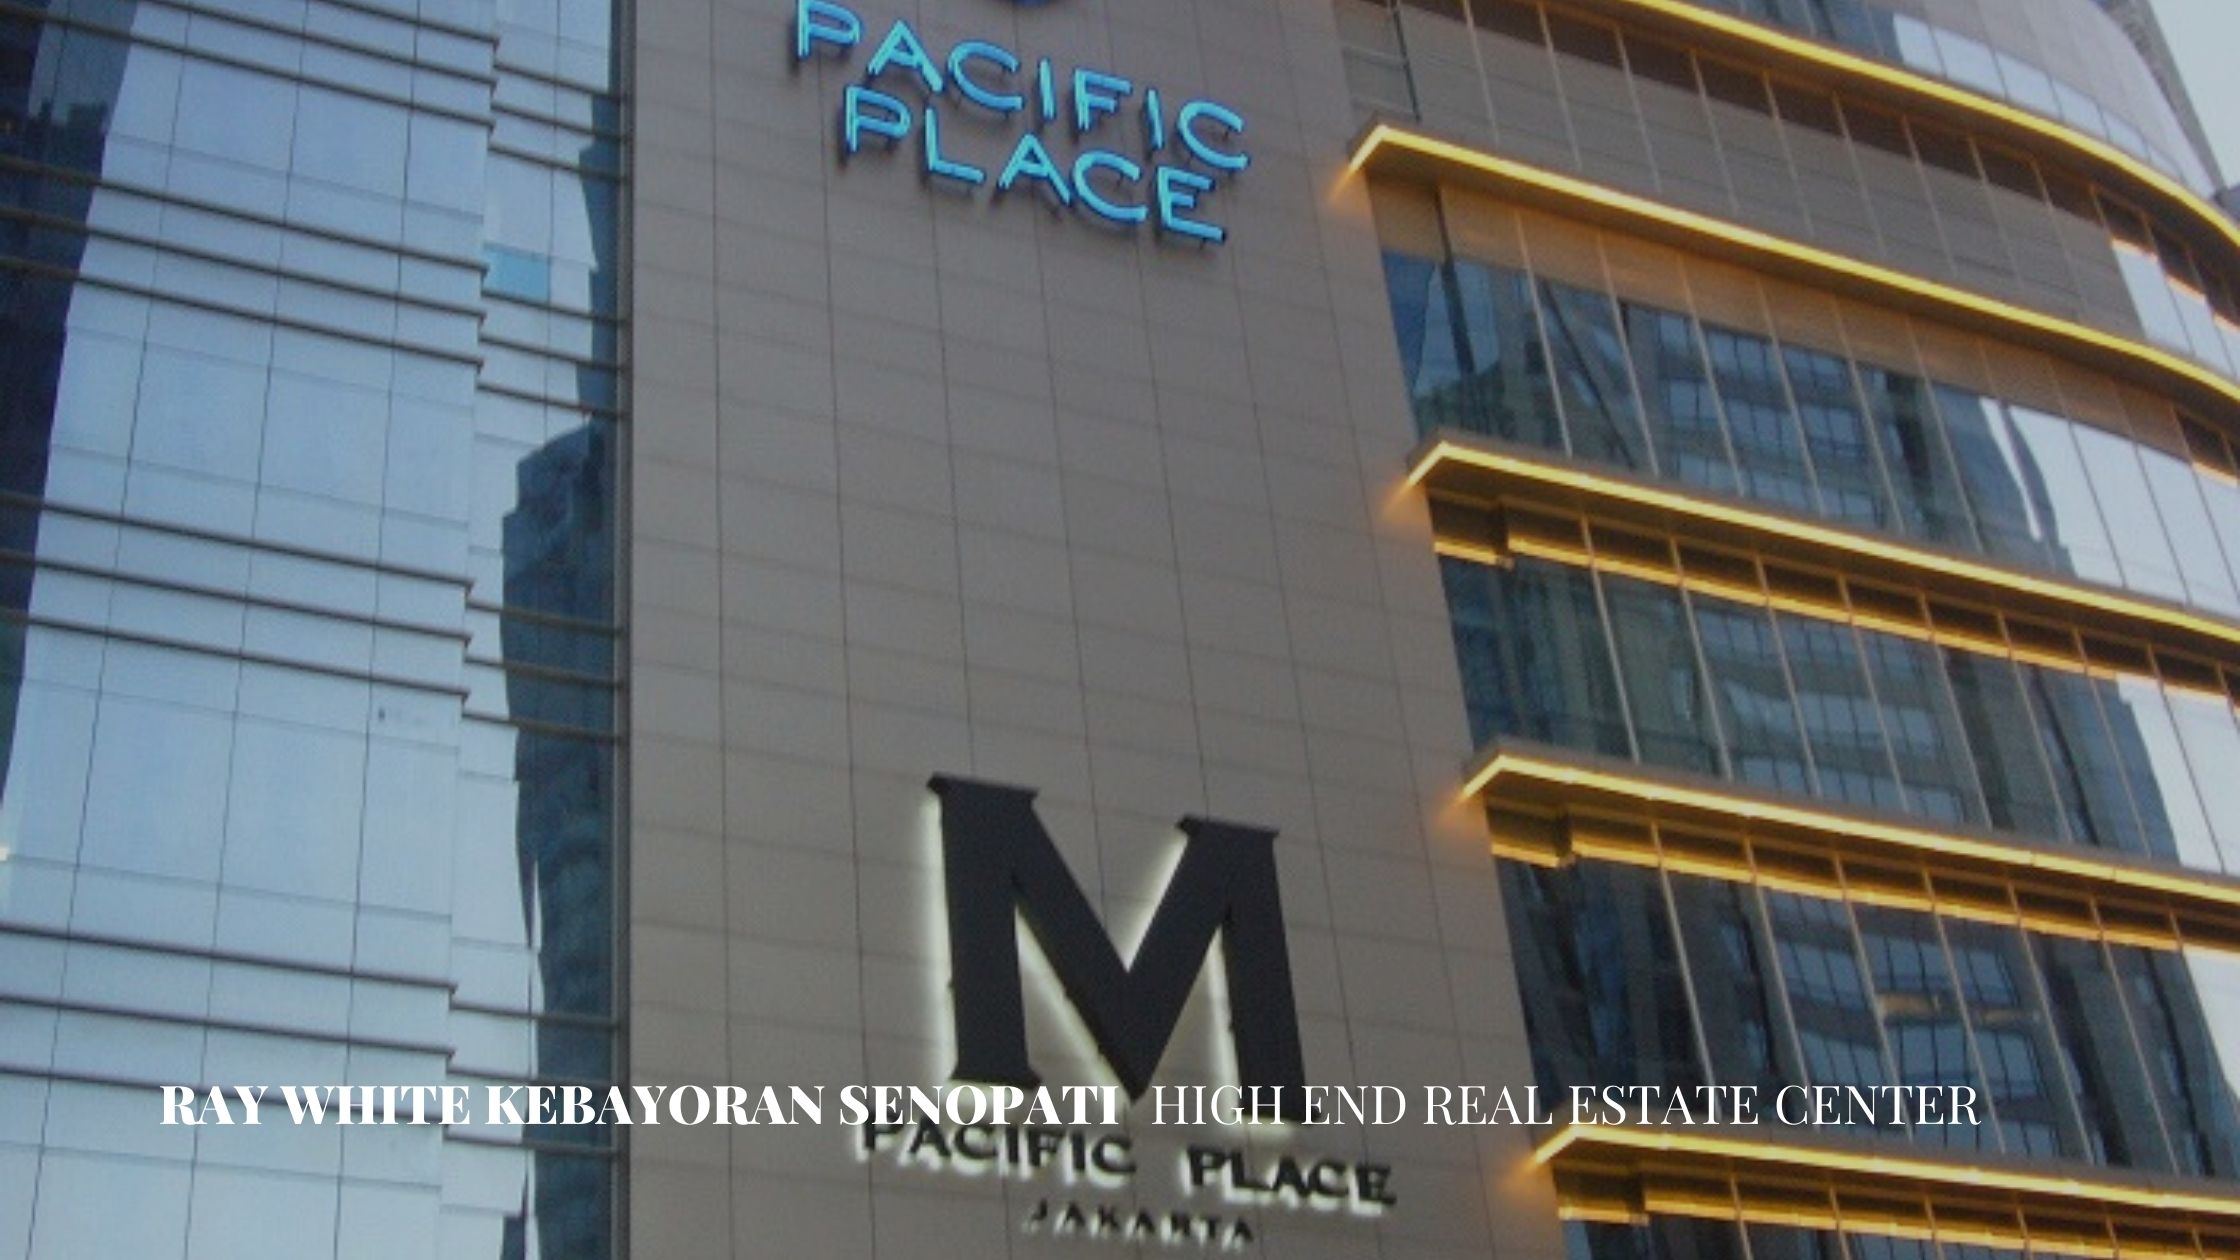 Pacific-Place